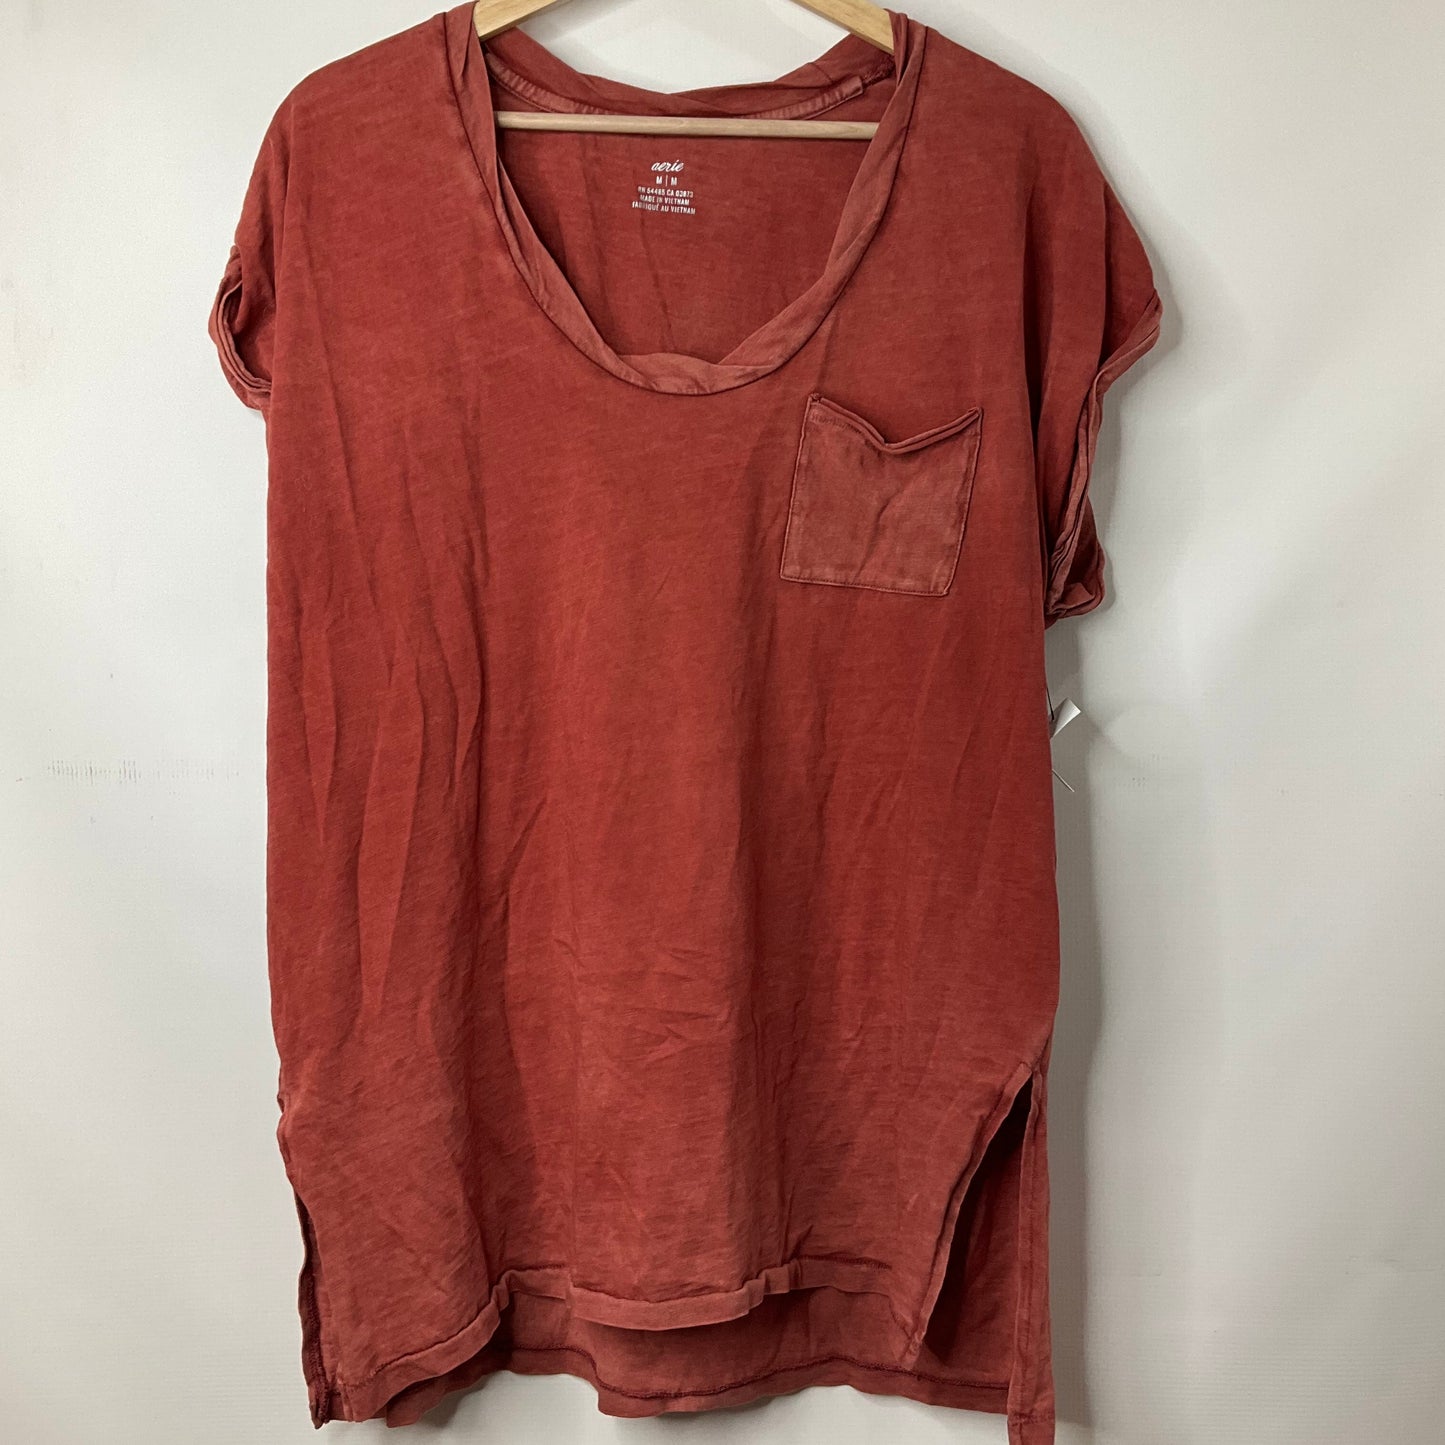 Red Top Short Sleeve Aerie, Size M